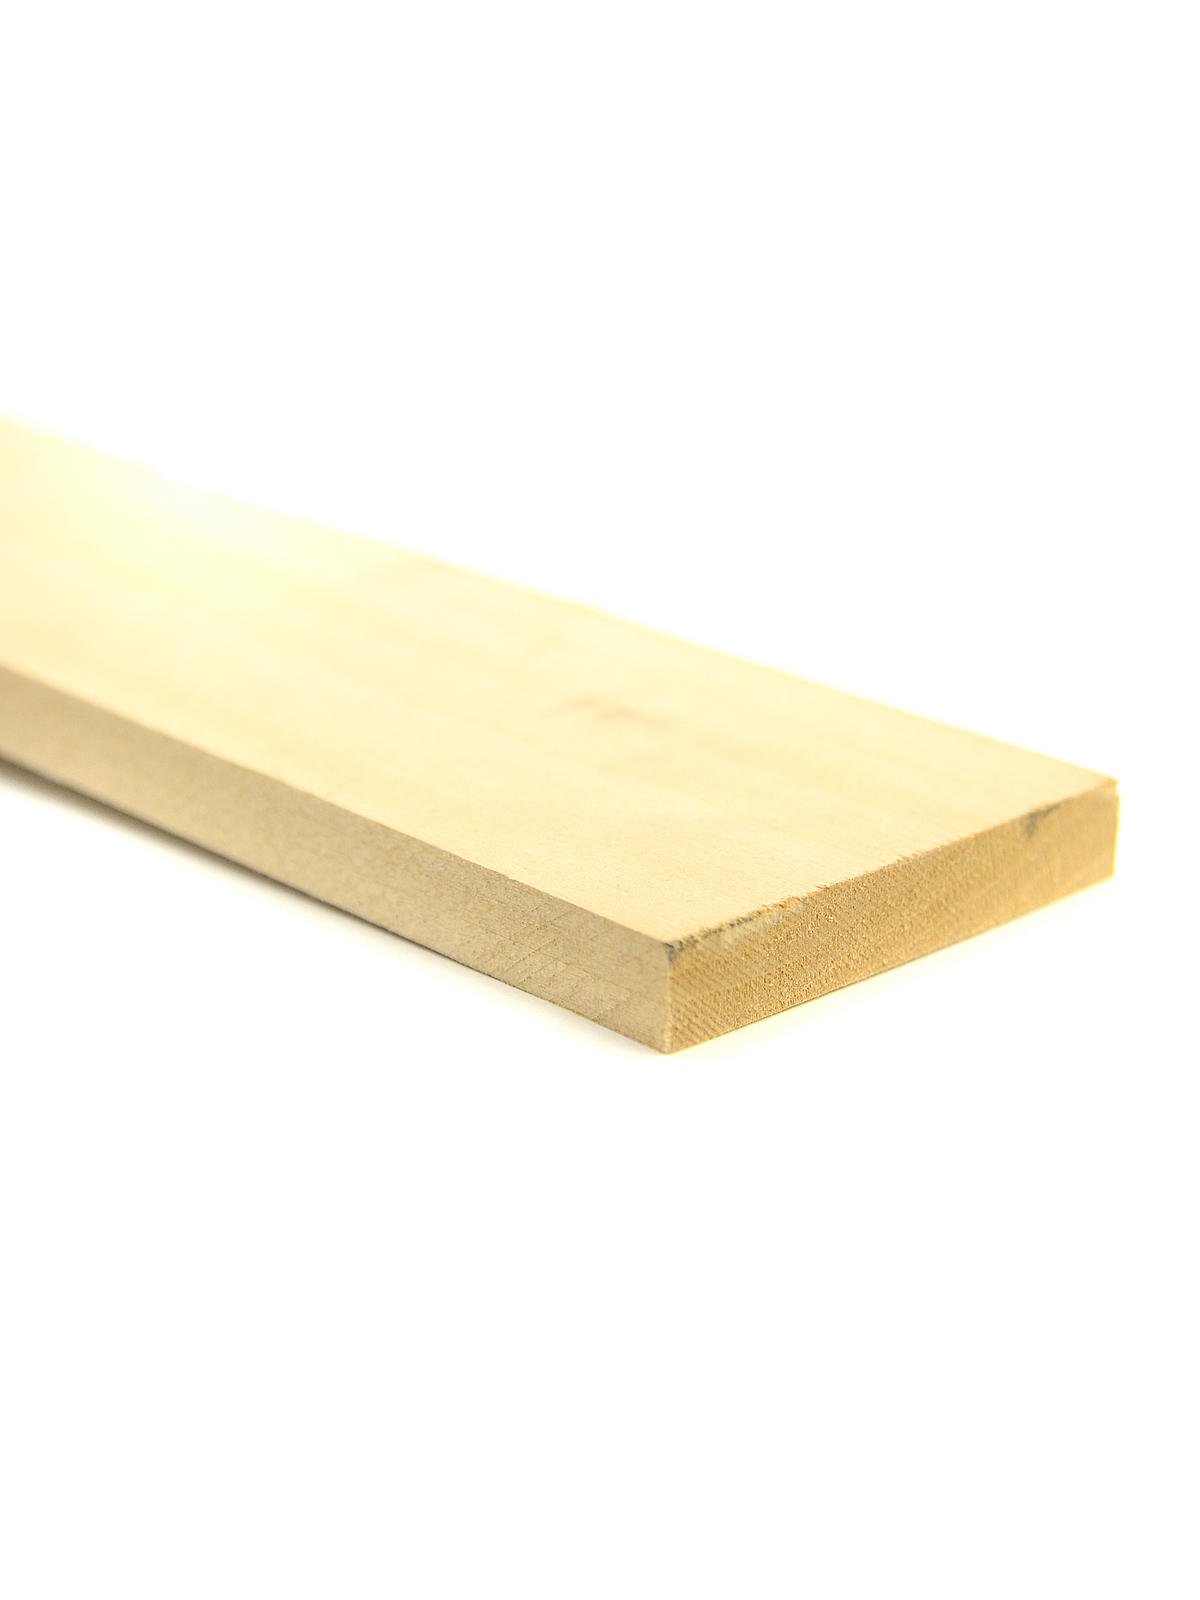 MIDWEST PRODUCTS 4404 Basswood Sheet, 24 in L, 4 in W, Basswood 10